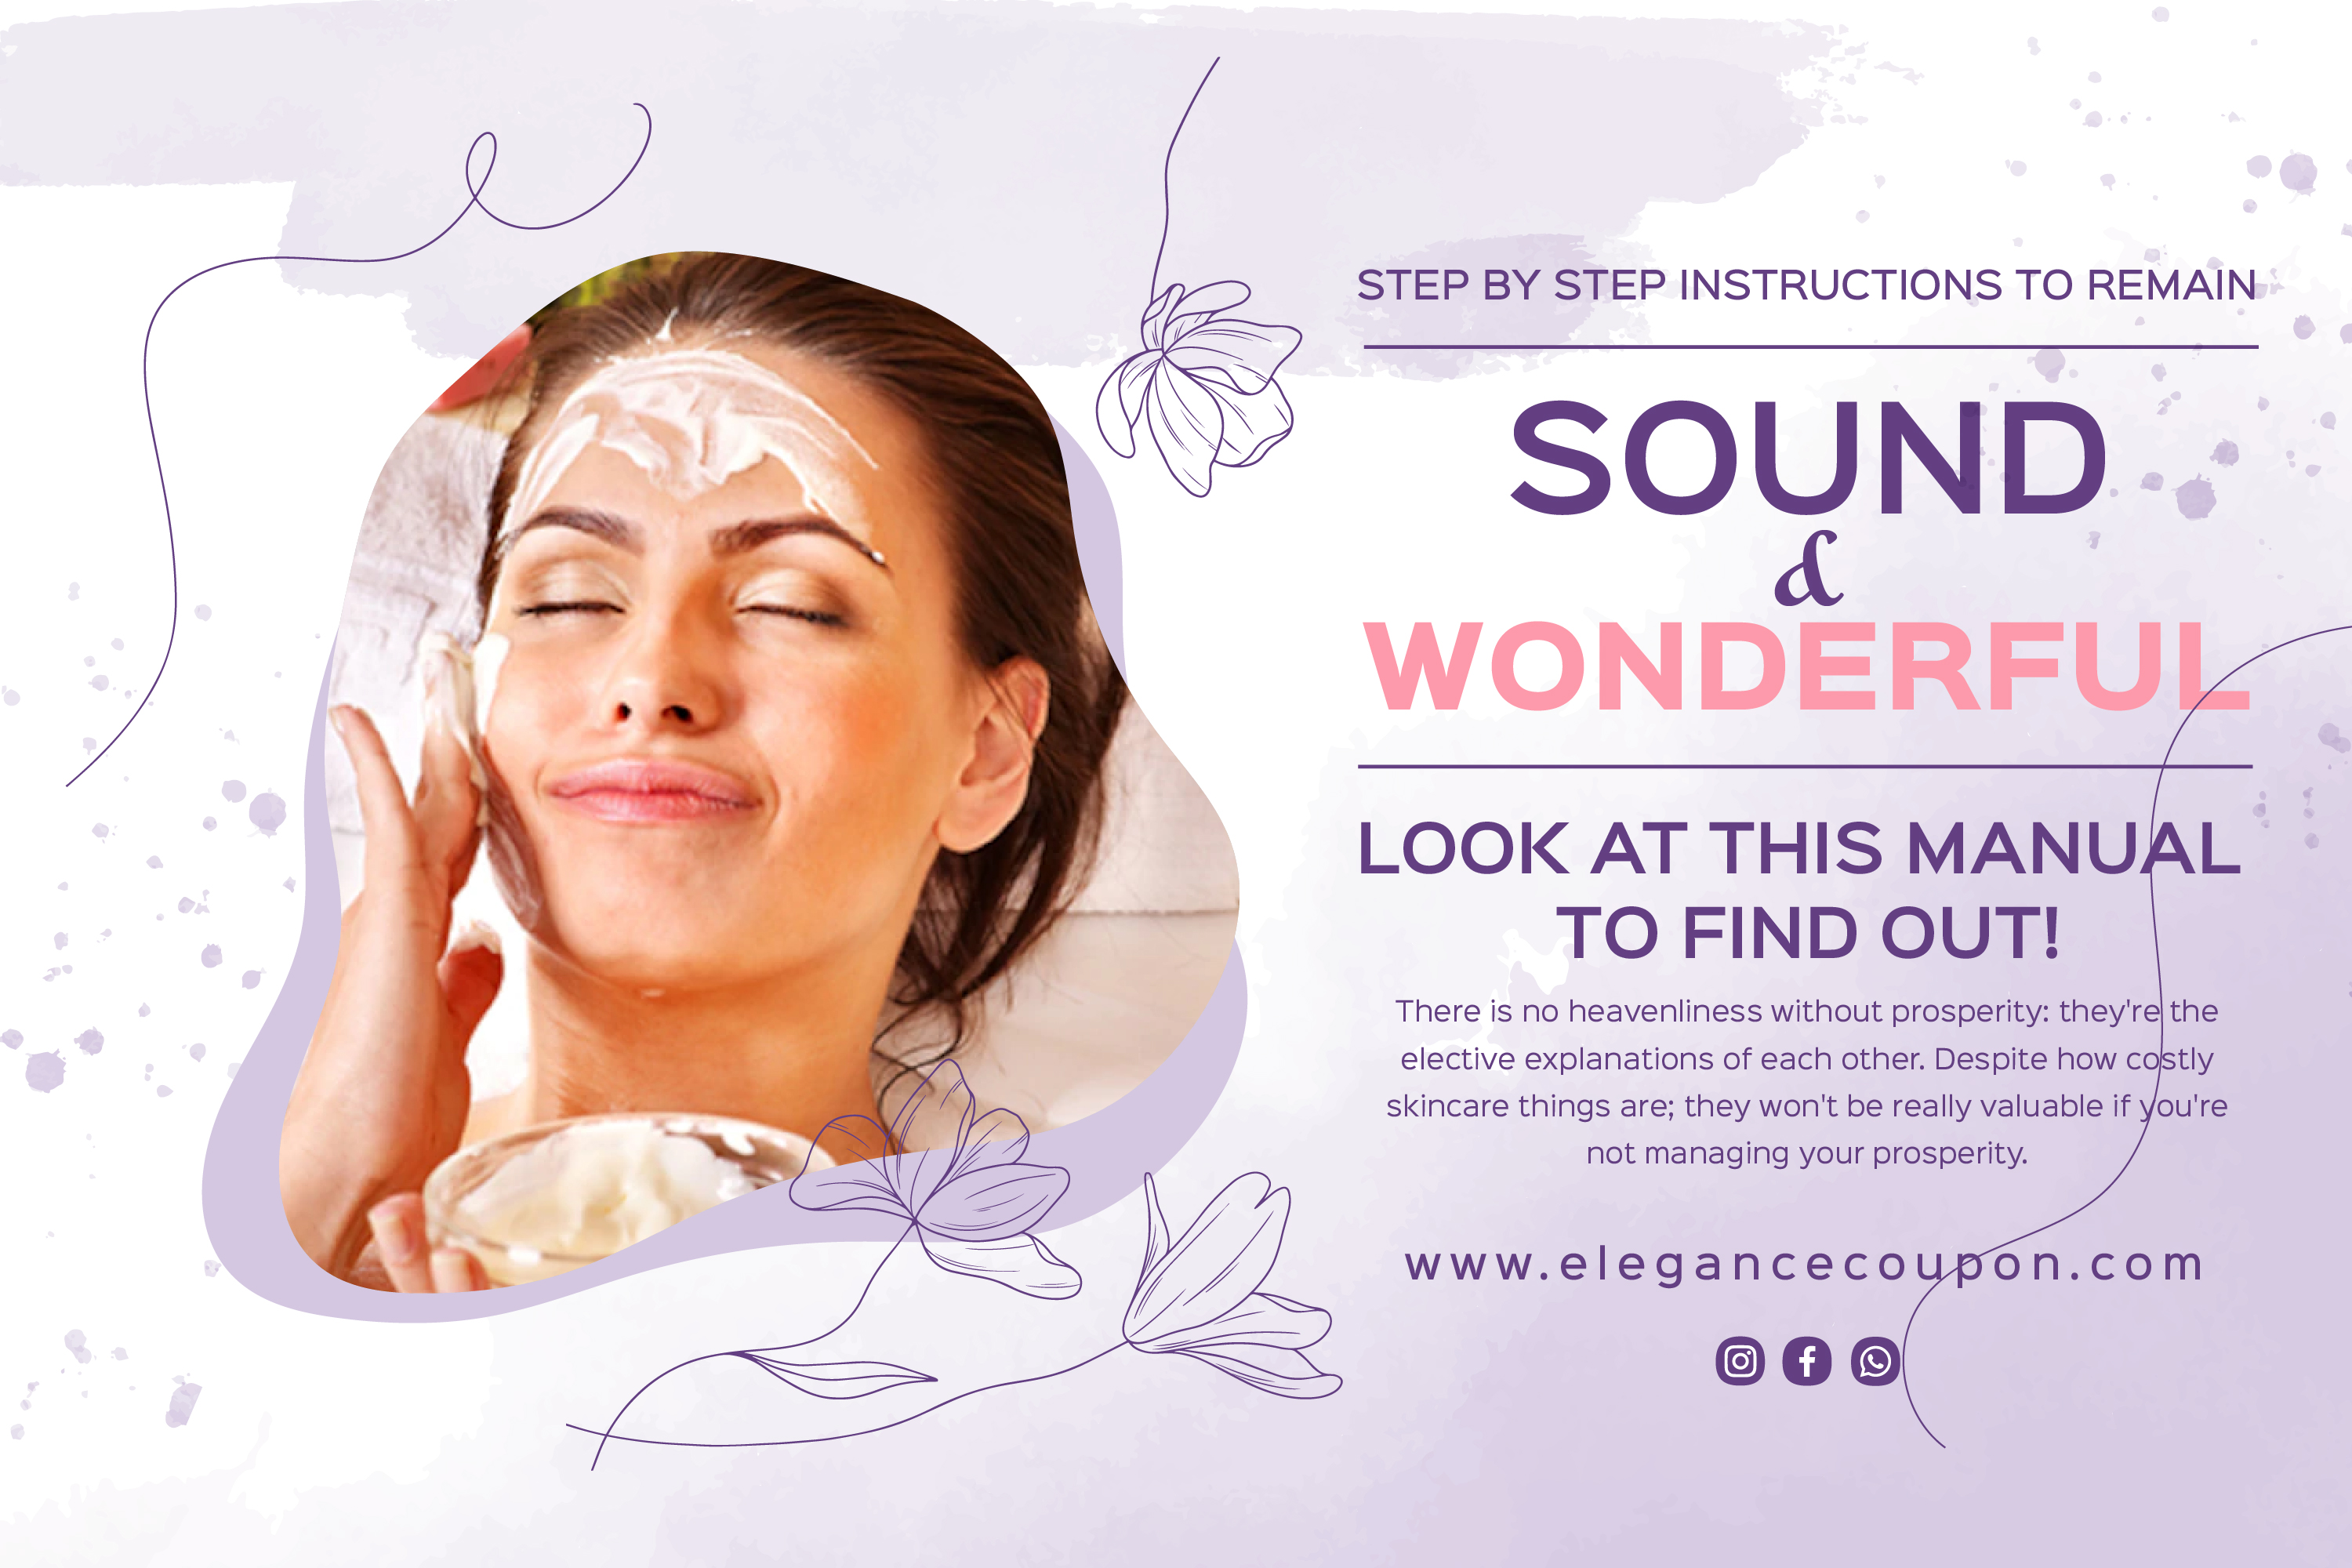 Step by step instructions to remain sound and Wonderful, look at this manual to find out!